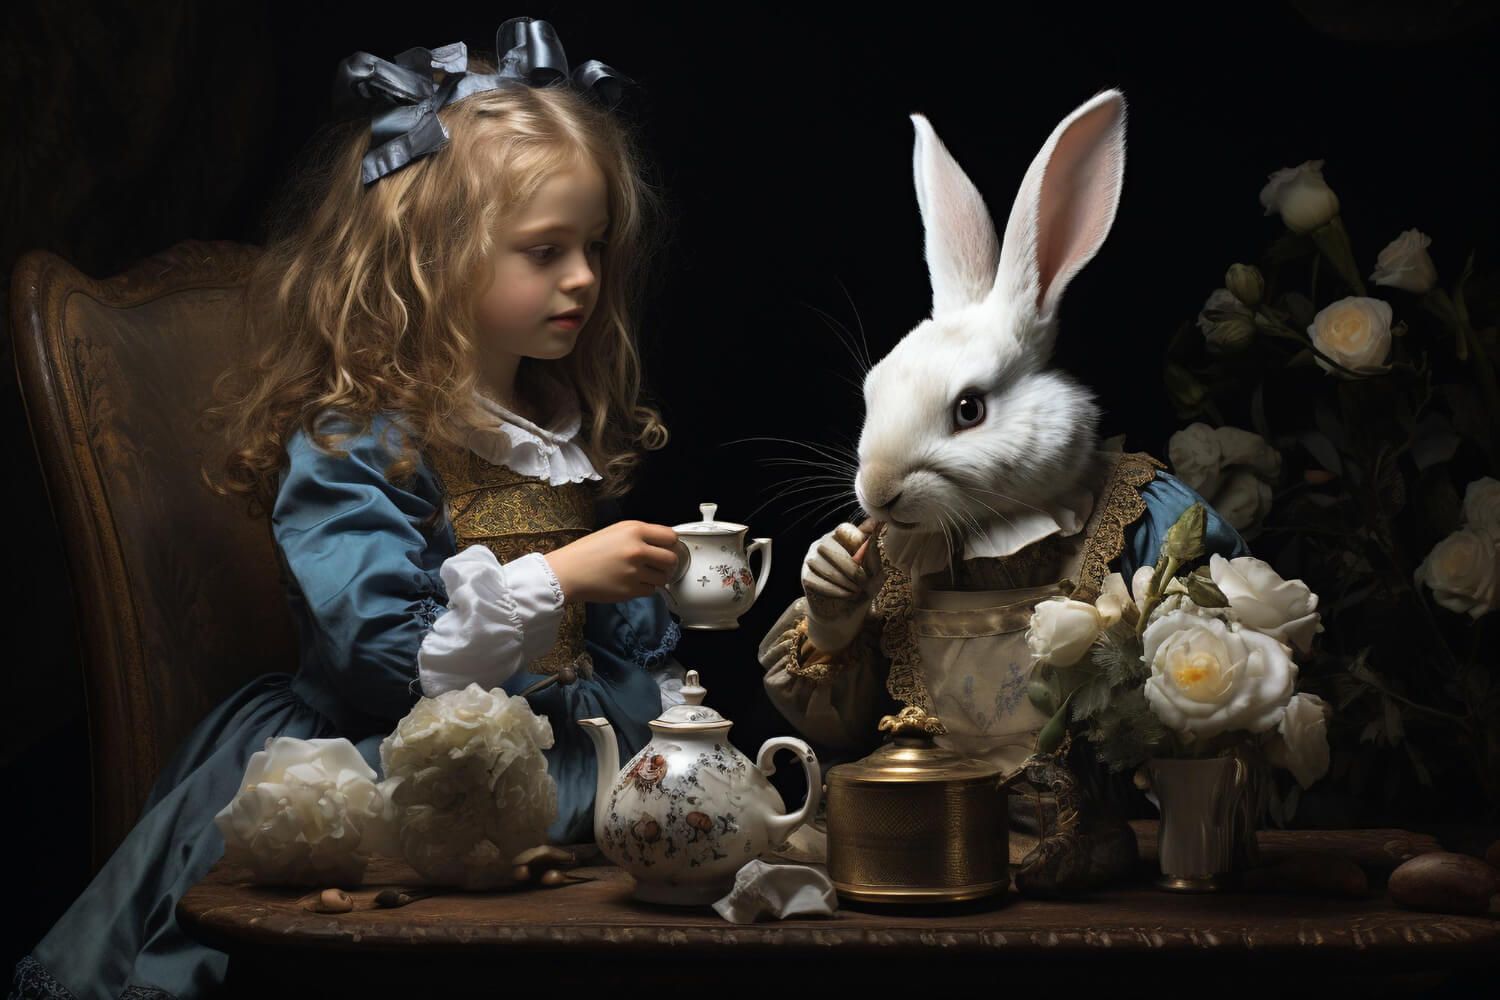 A dramatic scene with Alice and the White Rabbit